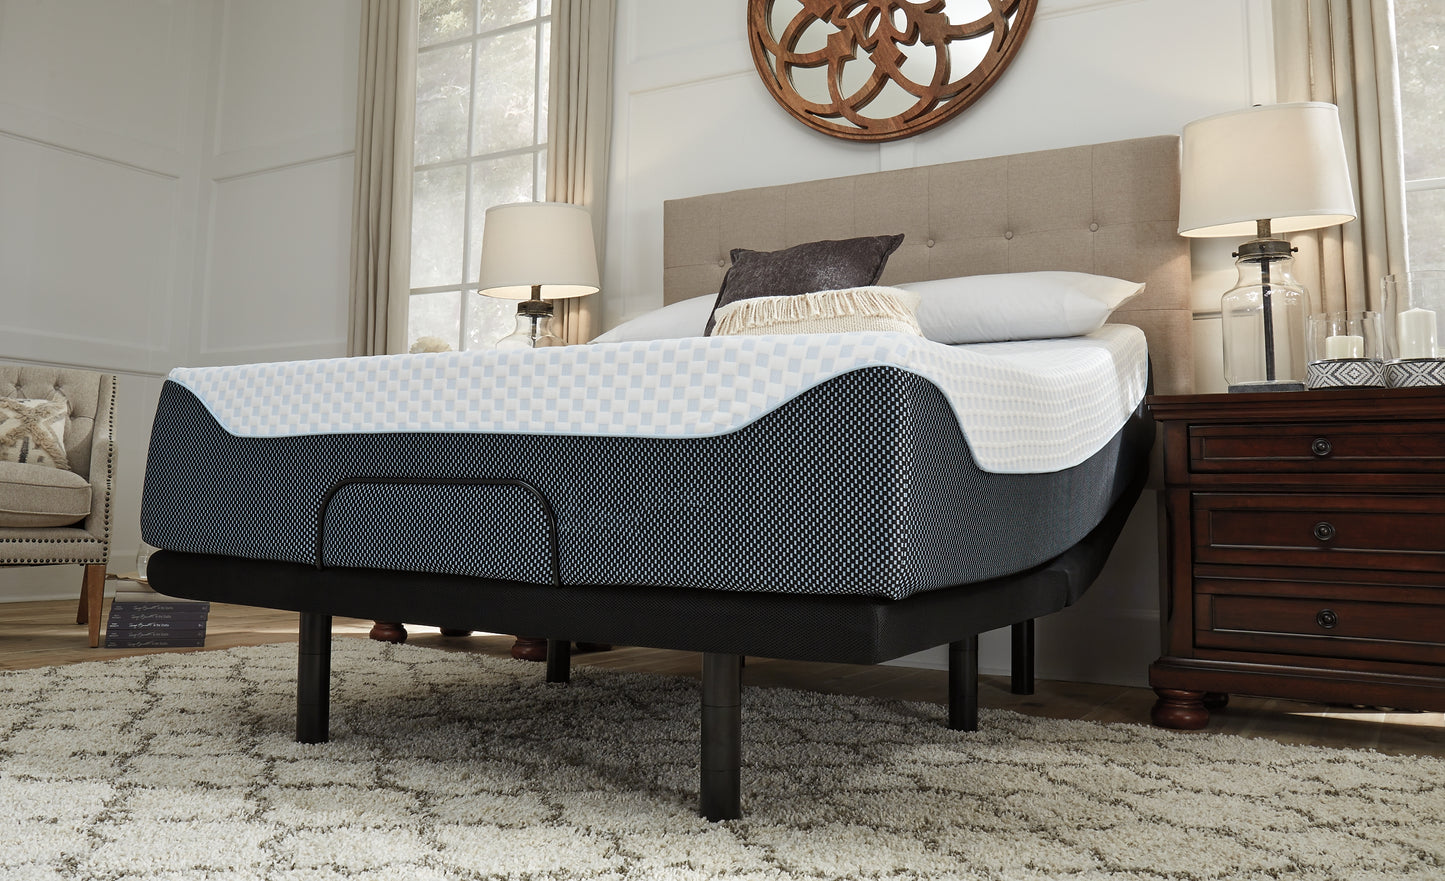 14 Inch Chime Elite Mattress with Adjustable Base